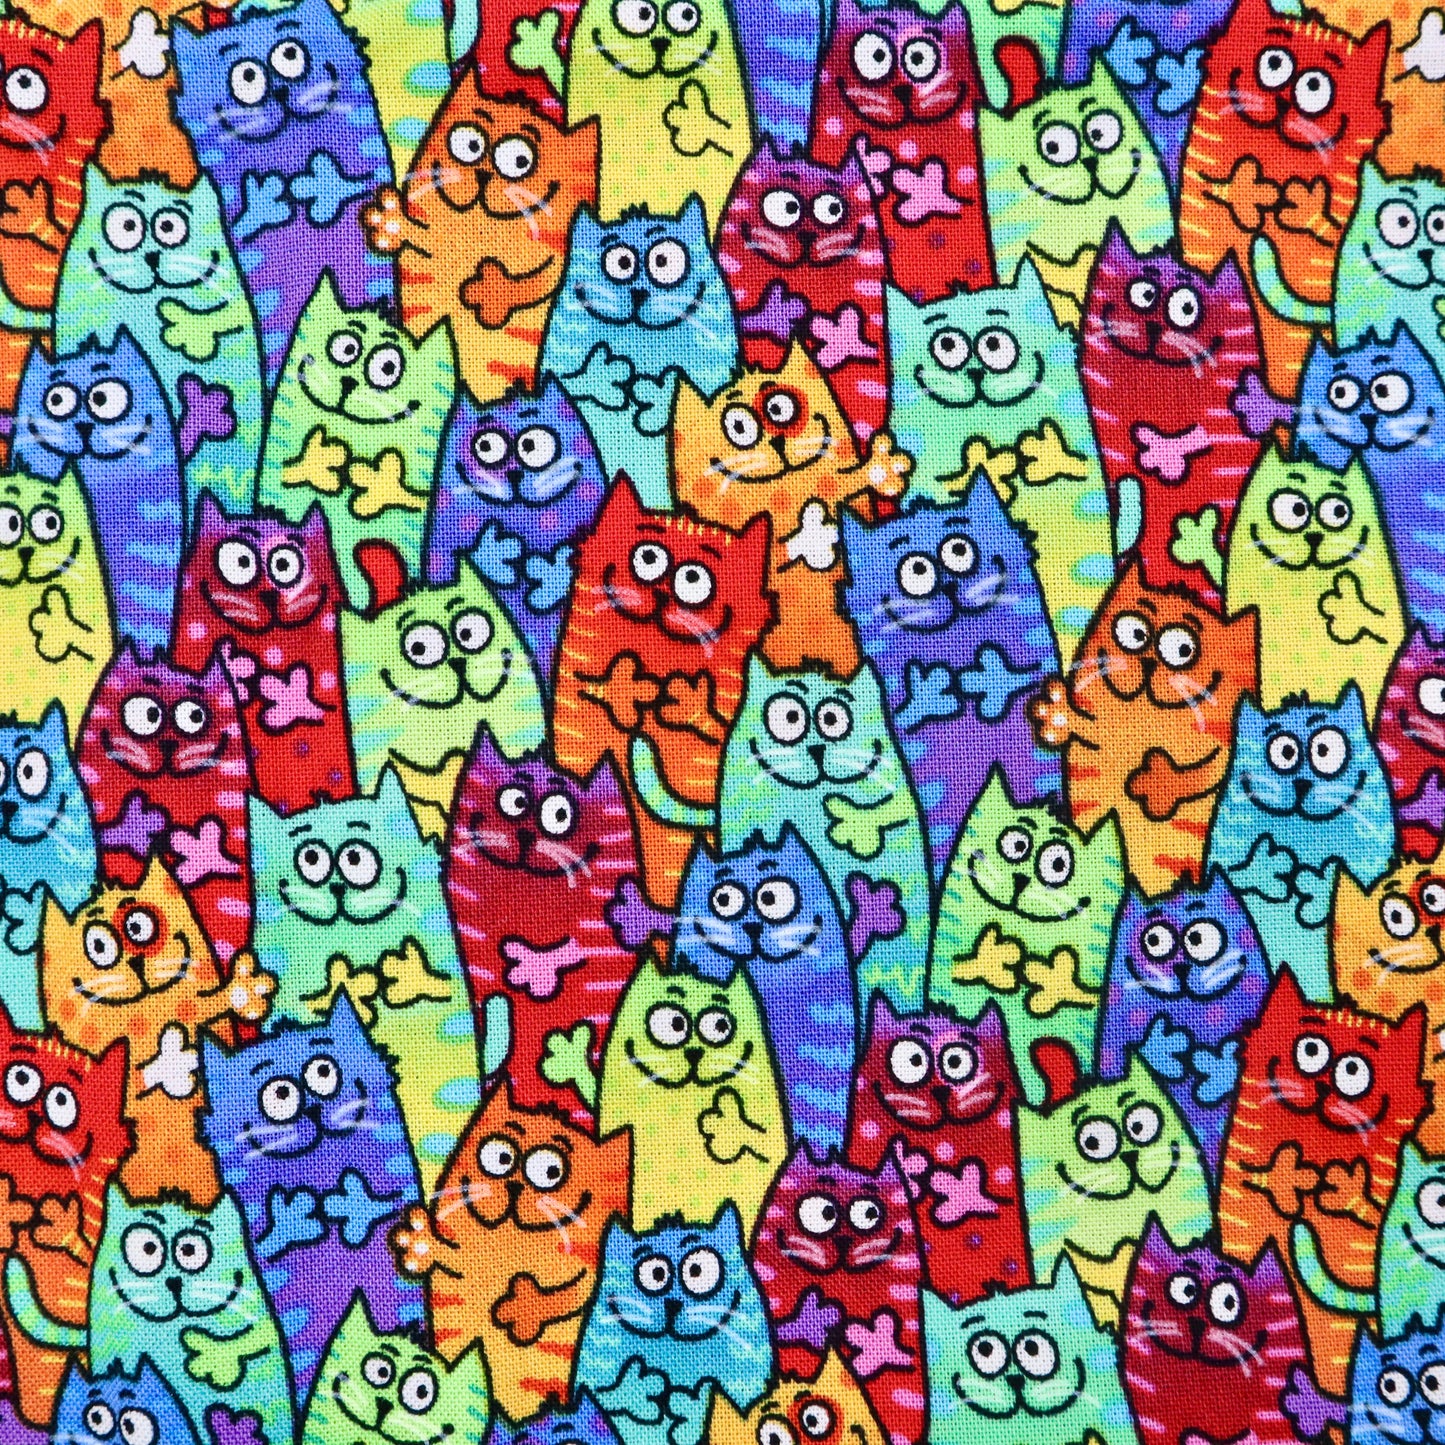 Pile of Cats - Quilting Cotton